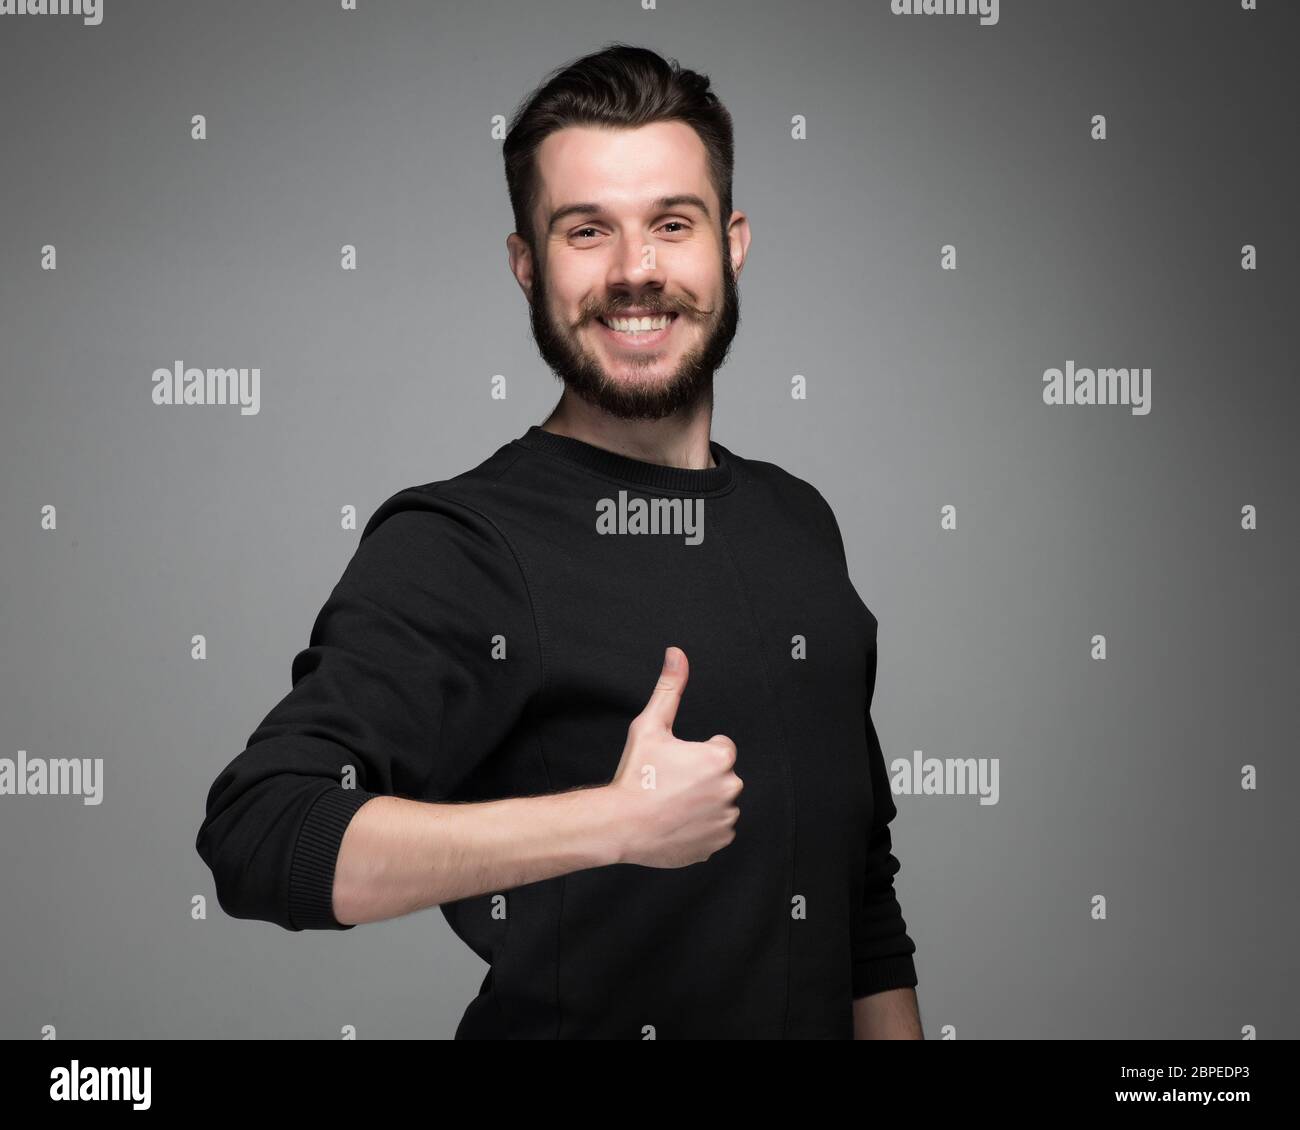 Closeup portrait of handsome young smiling man, giving a raised finger on gray background. Positive human emotions Stock Photo